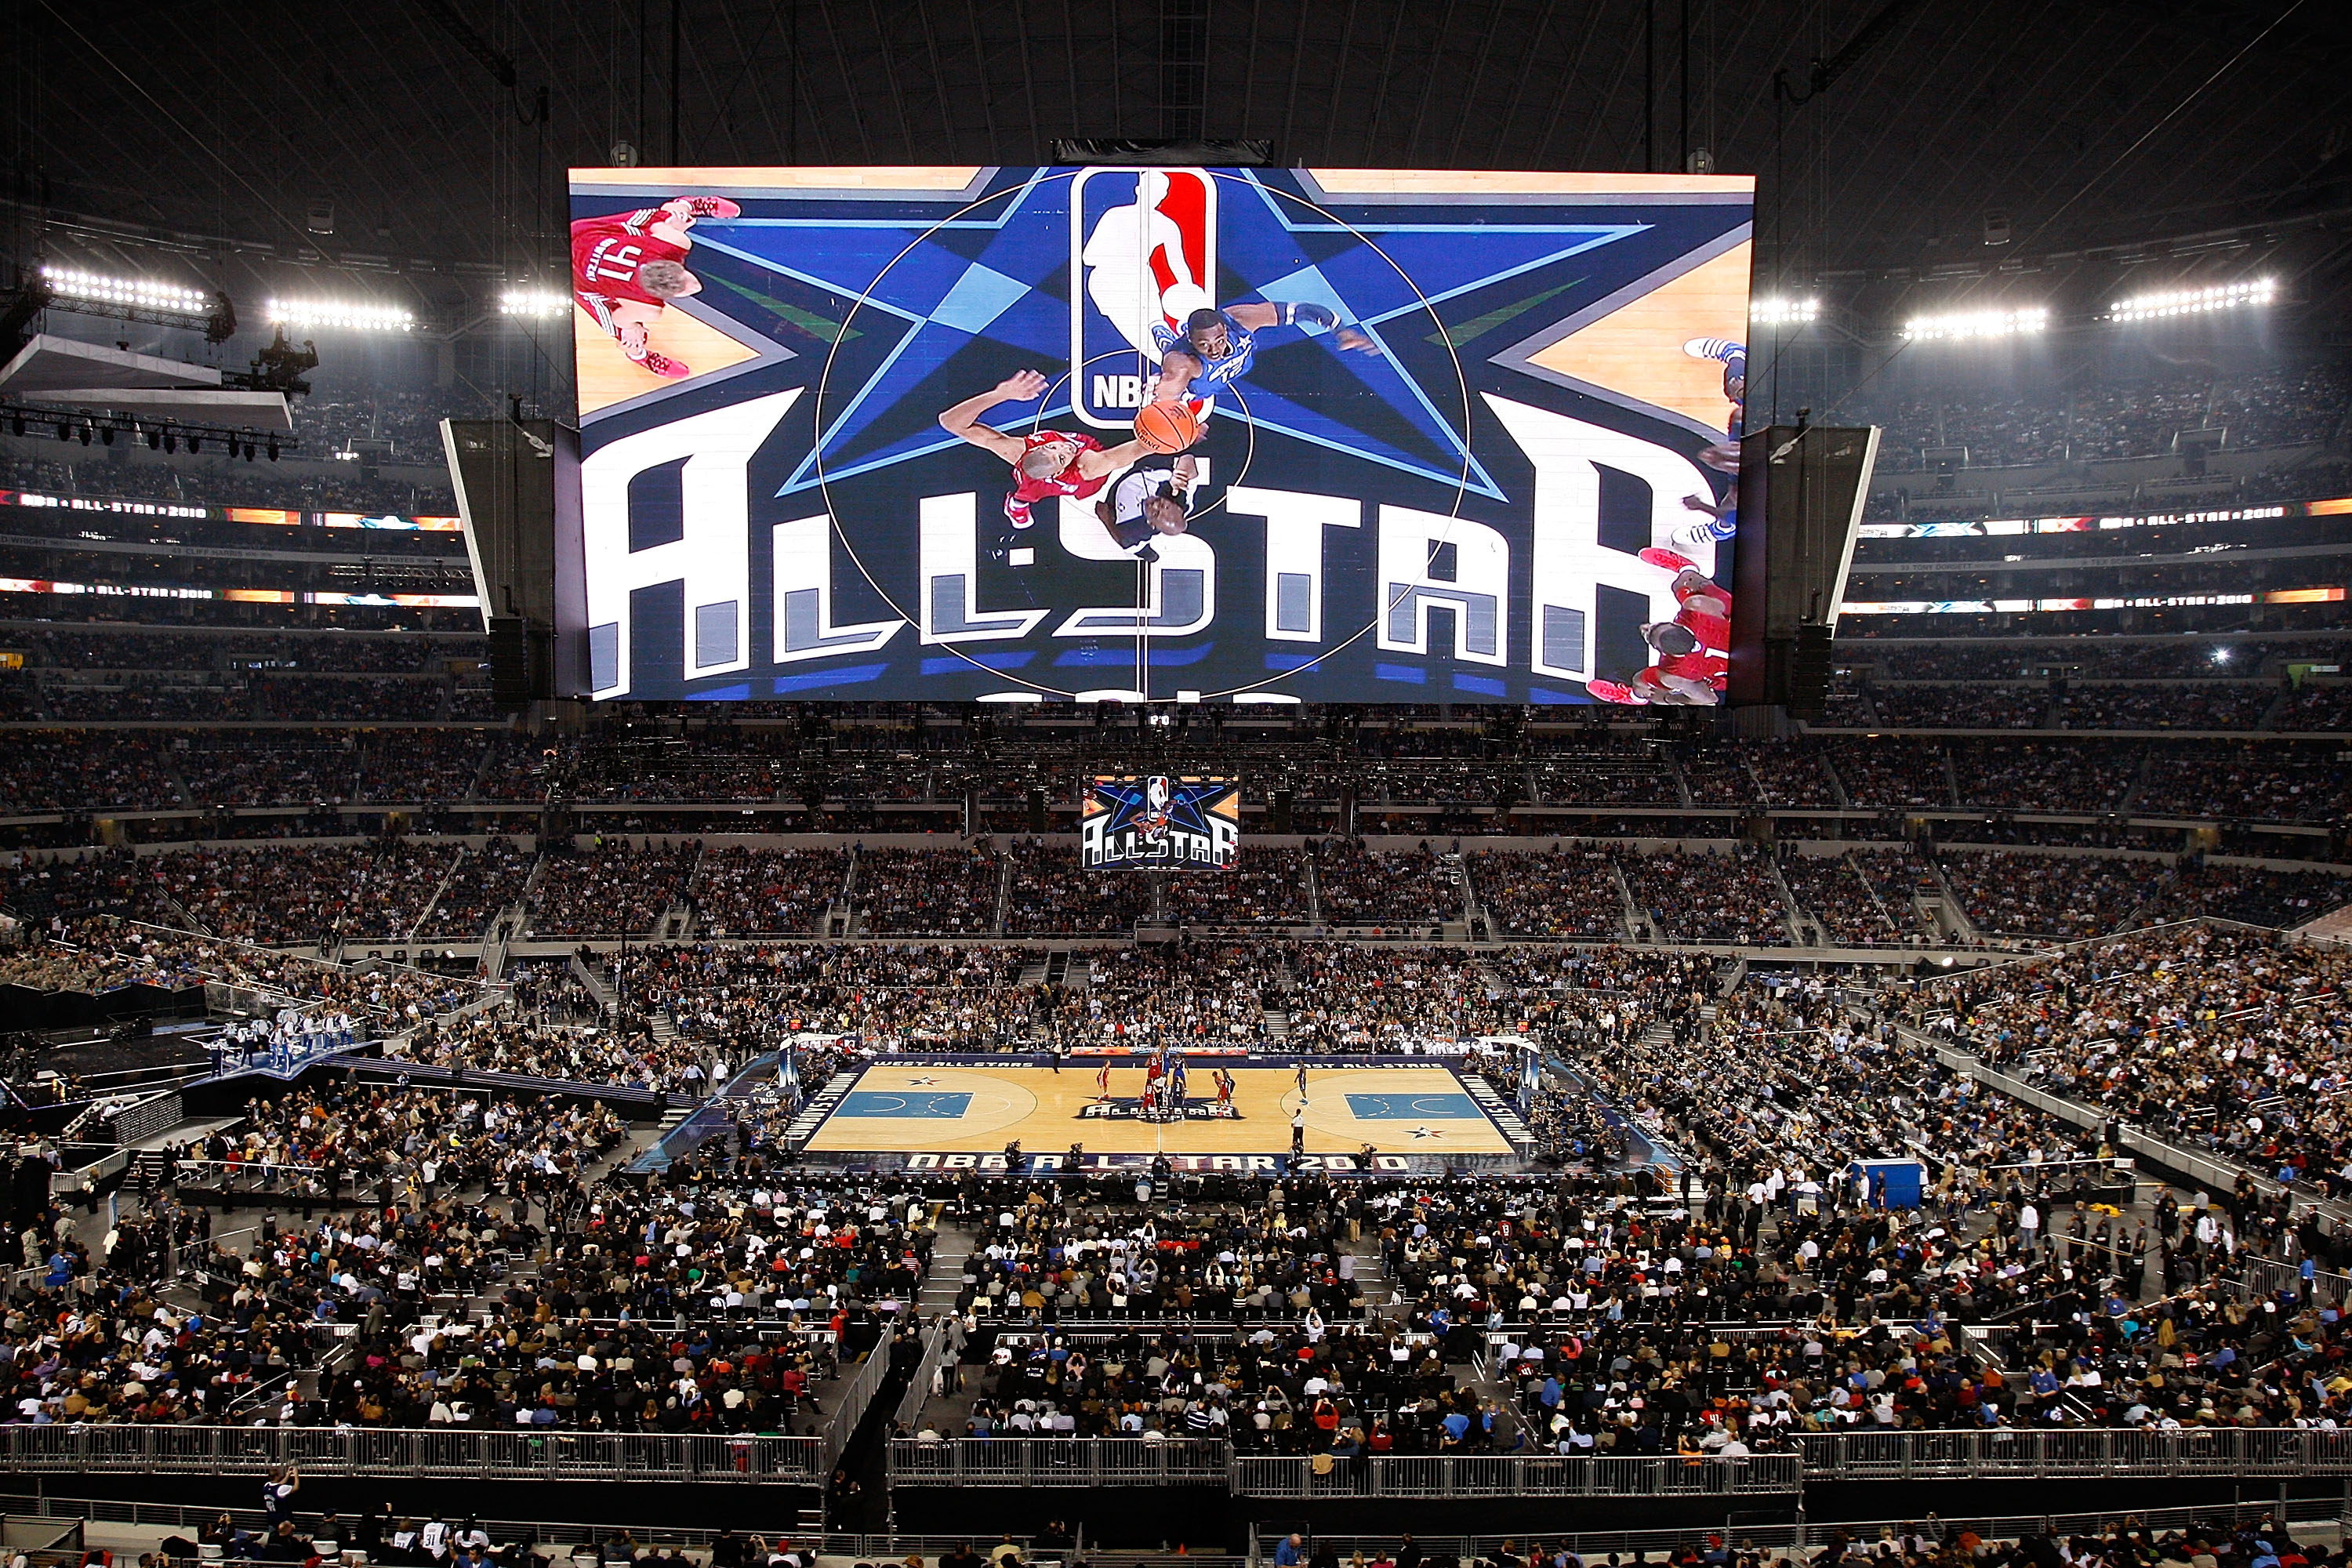 East bests West 122-120 in 55th NBA All-Star